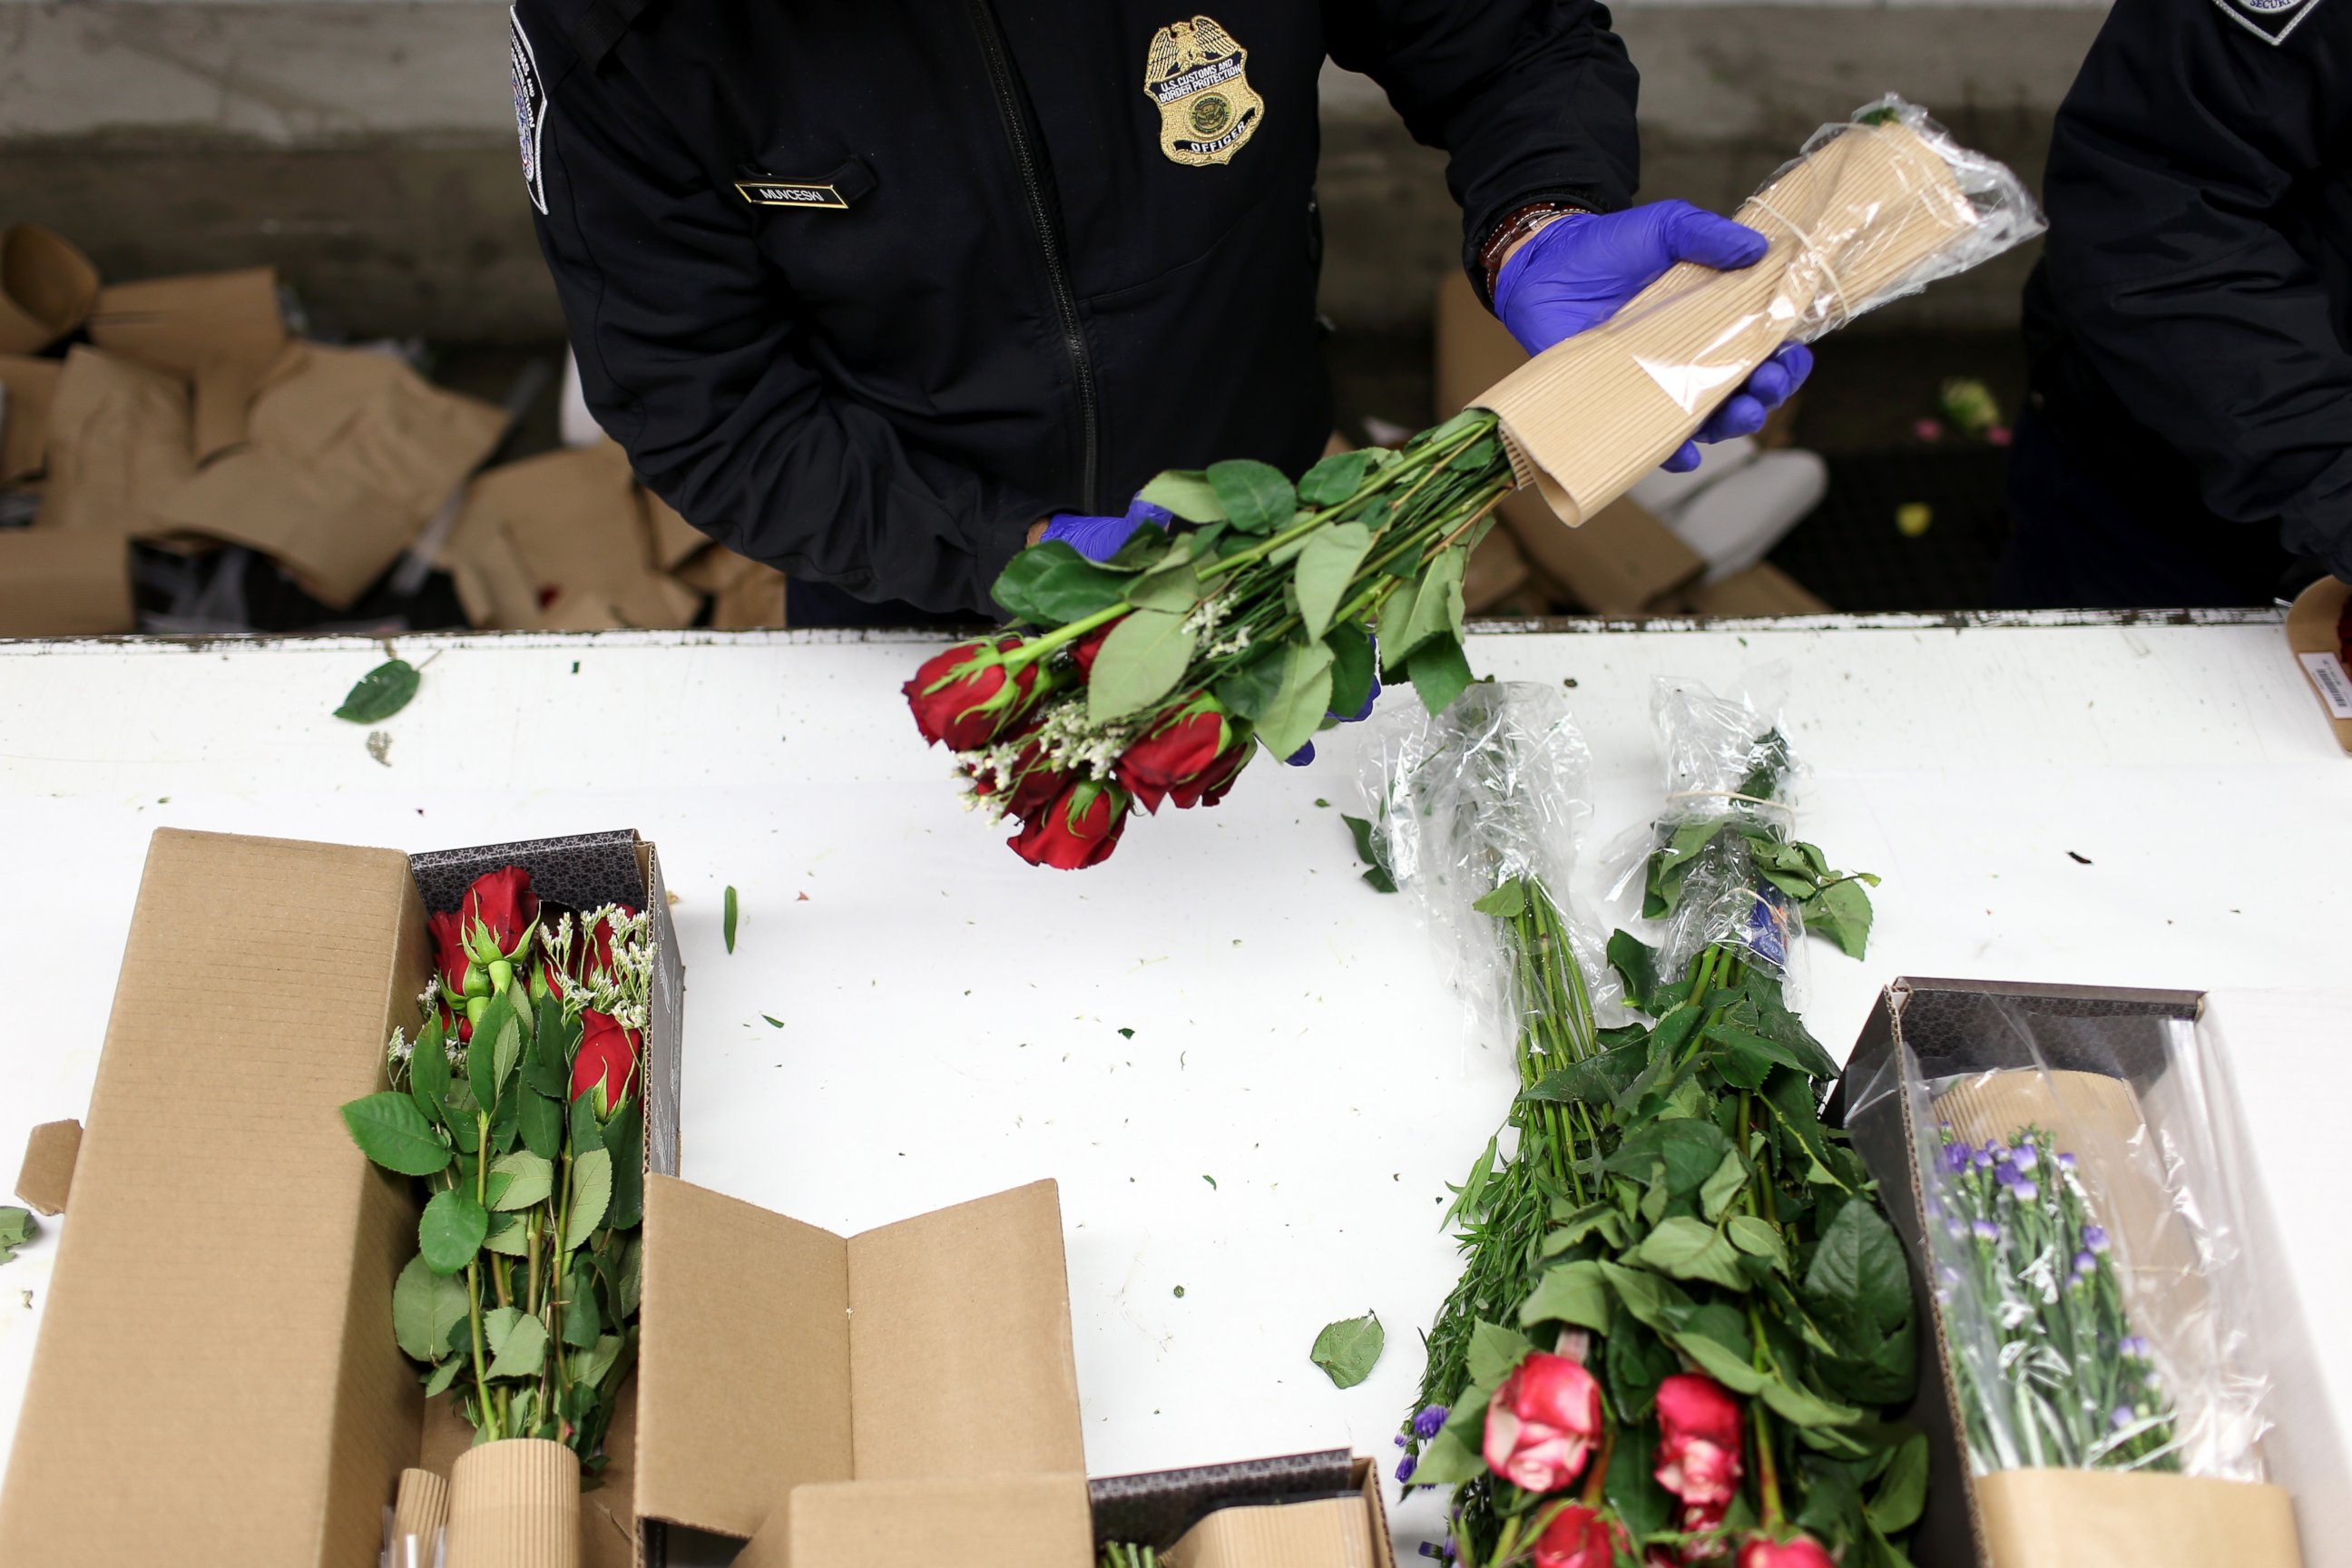 PHOTO: A U.S. Customs and Border Protection Agriculture Specialist inspects flowers for foreign pests or diseases at Miami International Airport Feb. 10, 2015 in Miami, Fla.